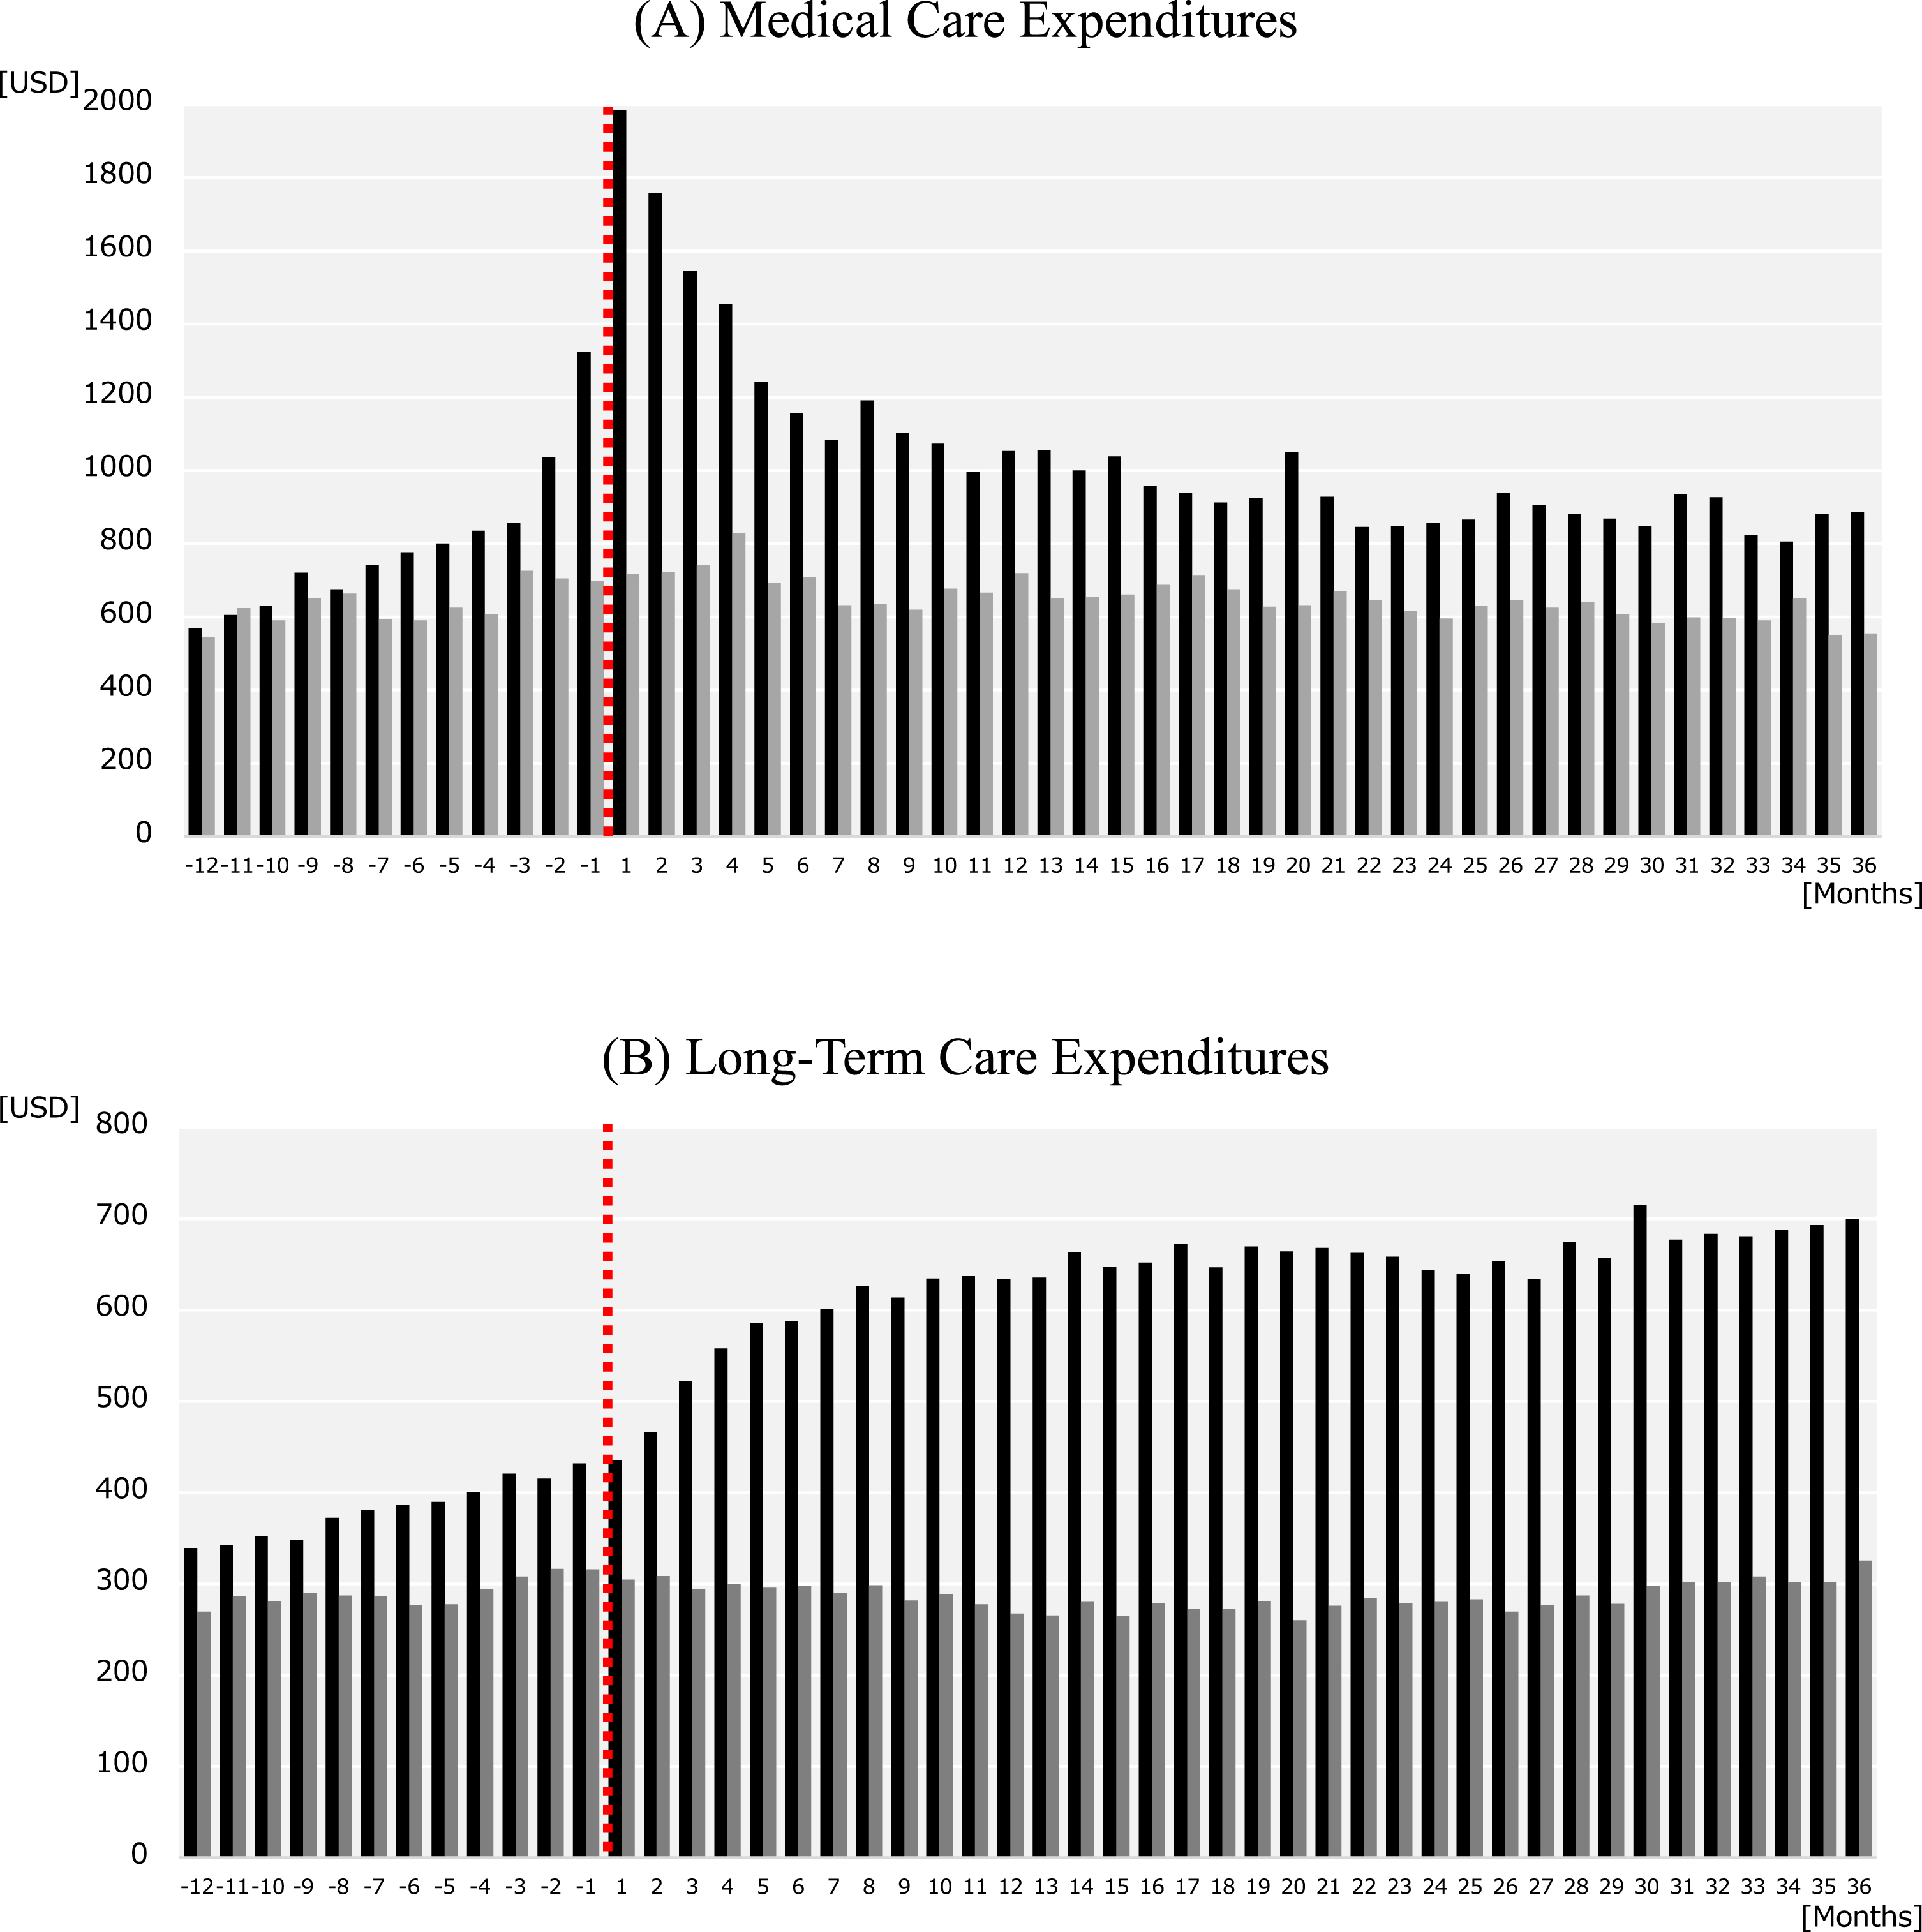 Trends in monthly expenditures in Alzheimer’s disease (AD) patients and non-AD controls. The graphs show the monthly (A) medical care expenditures and (B) long-term care expenditures from 12 months before and 36 months after the index month. The black bars indicate the expenditures for AD patients and the gray bars indicate the expenditures for non-AD controls. The dashed line indicates the index month in which an AD patient was newly diagnosed with AD. Each non-AD control used the same index month as their matched AD patient.